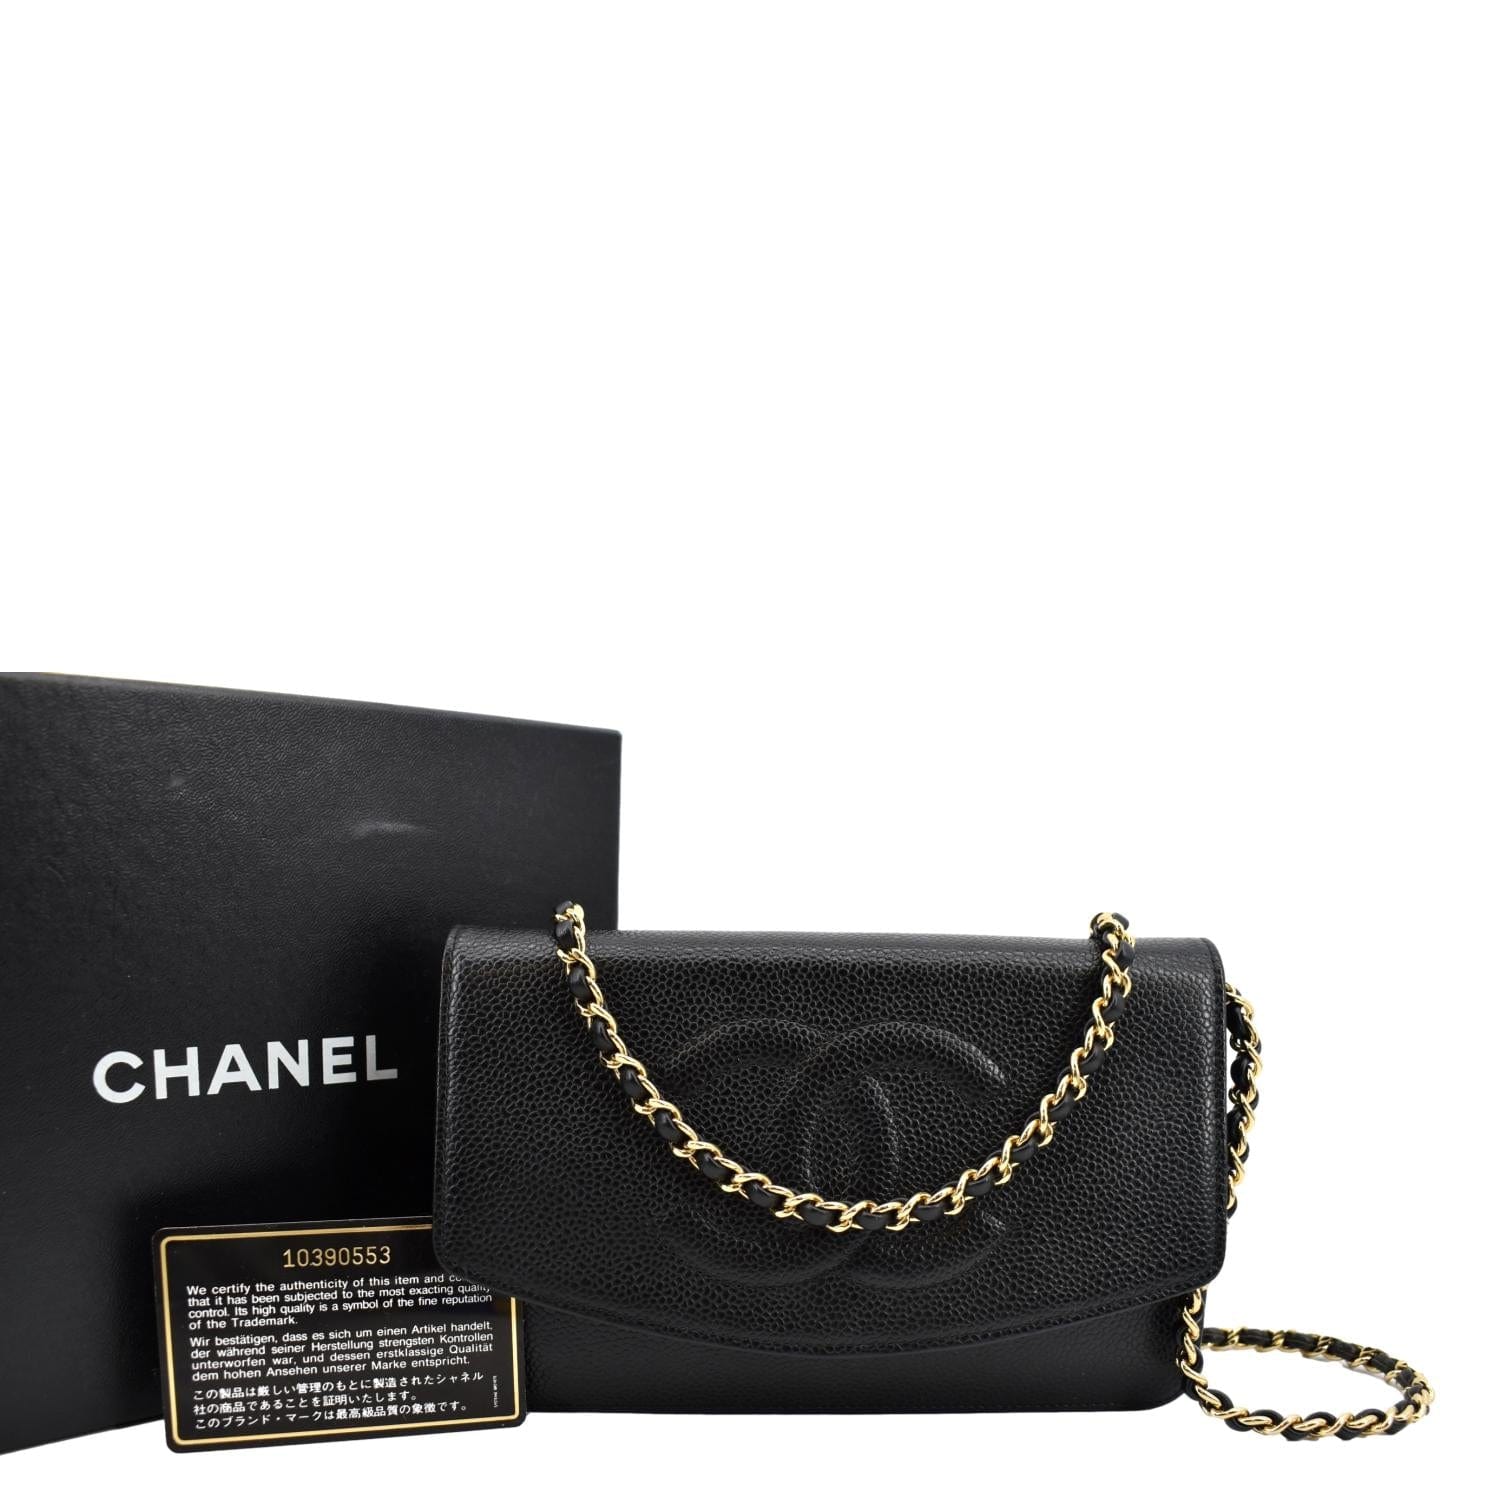 Timeless/classique leather wallet Chanel Black in Leather - 33687766